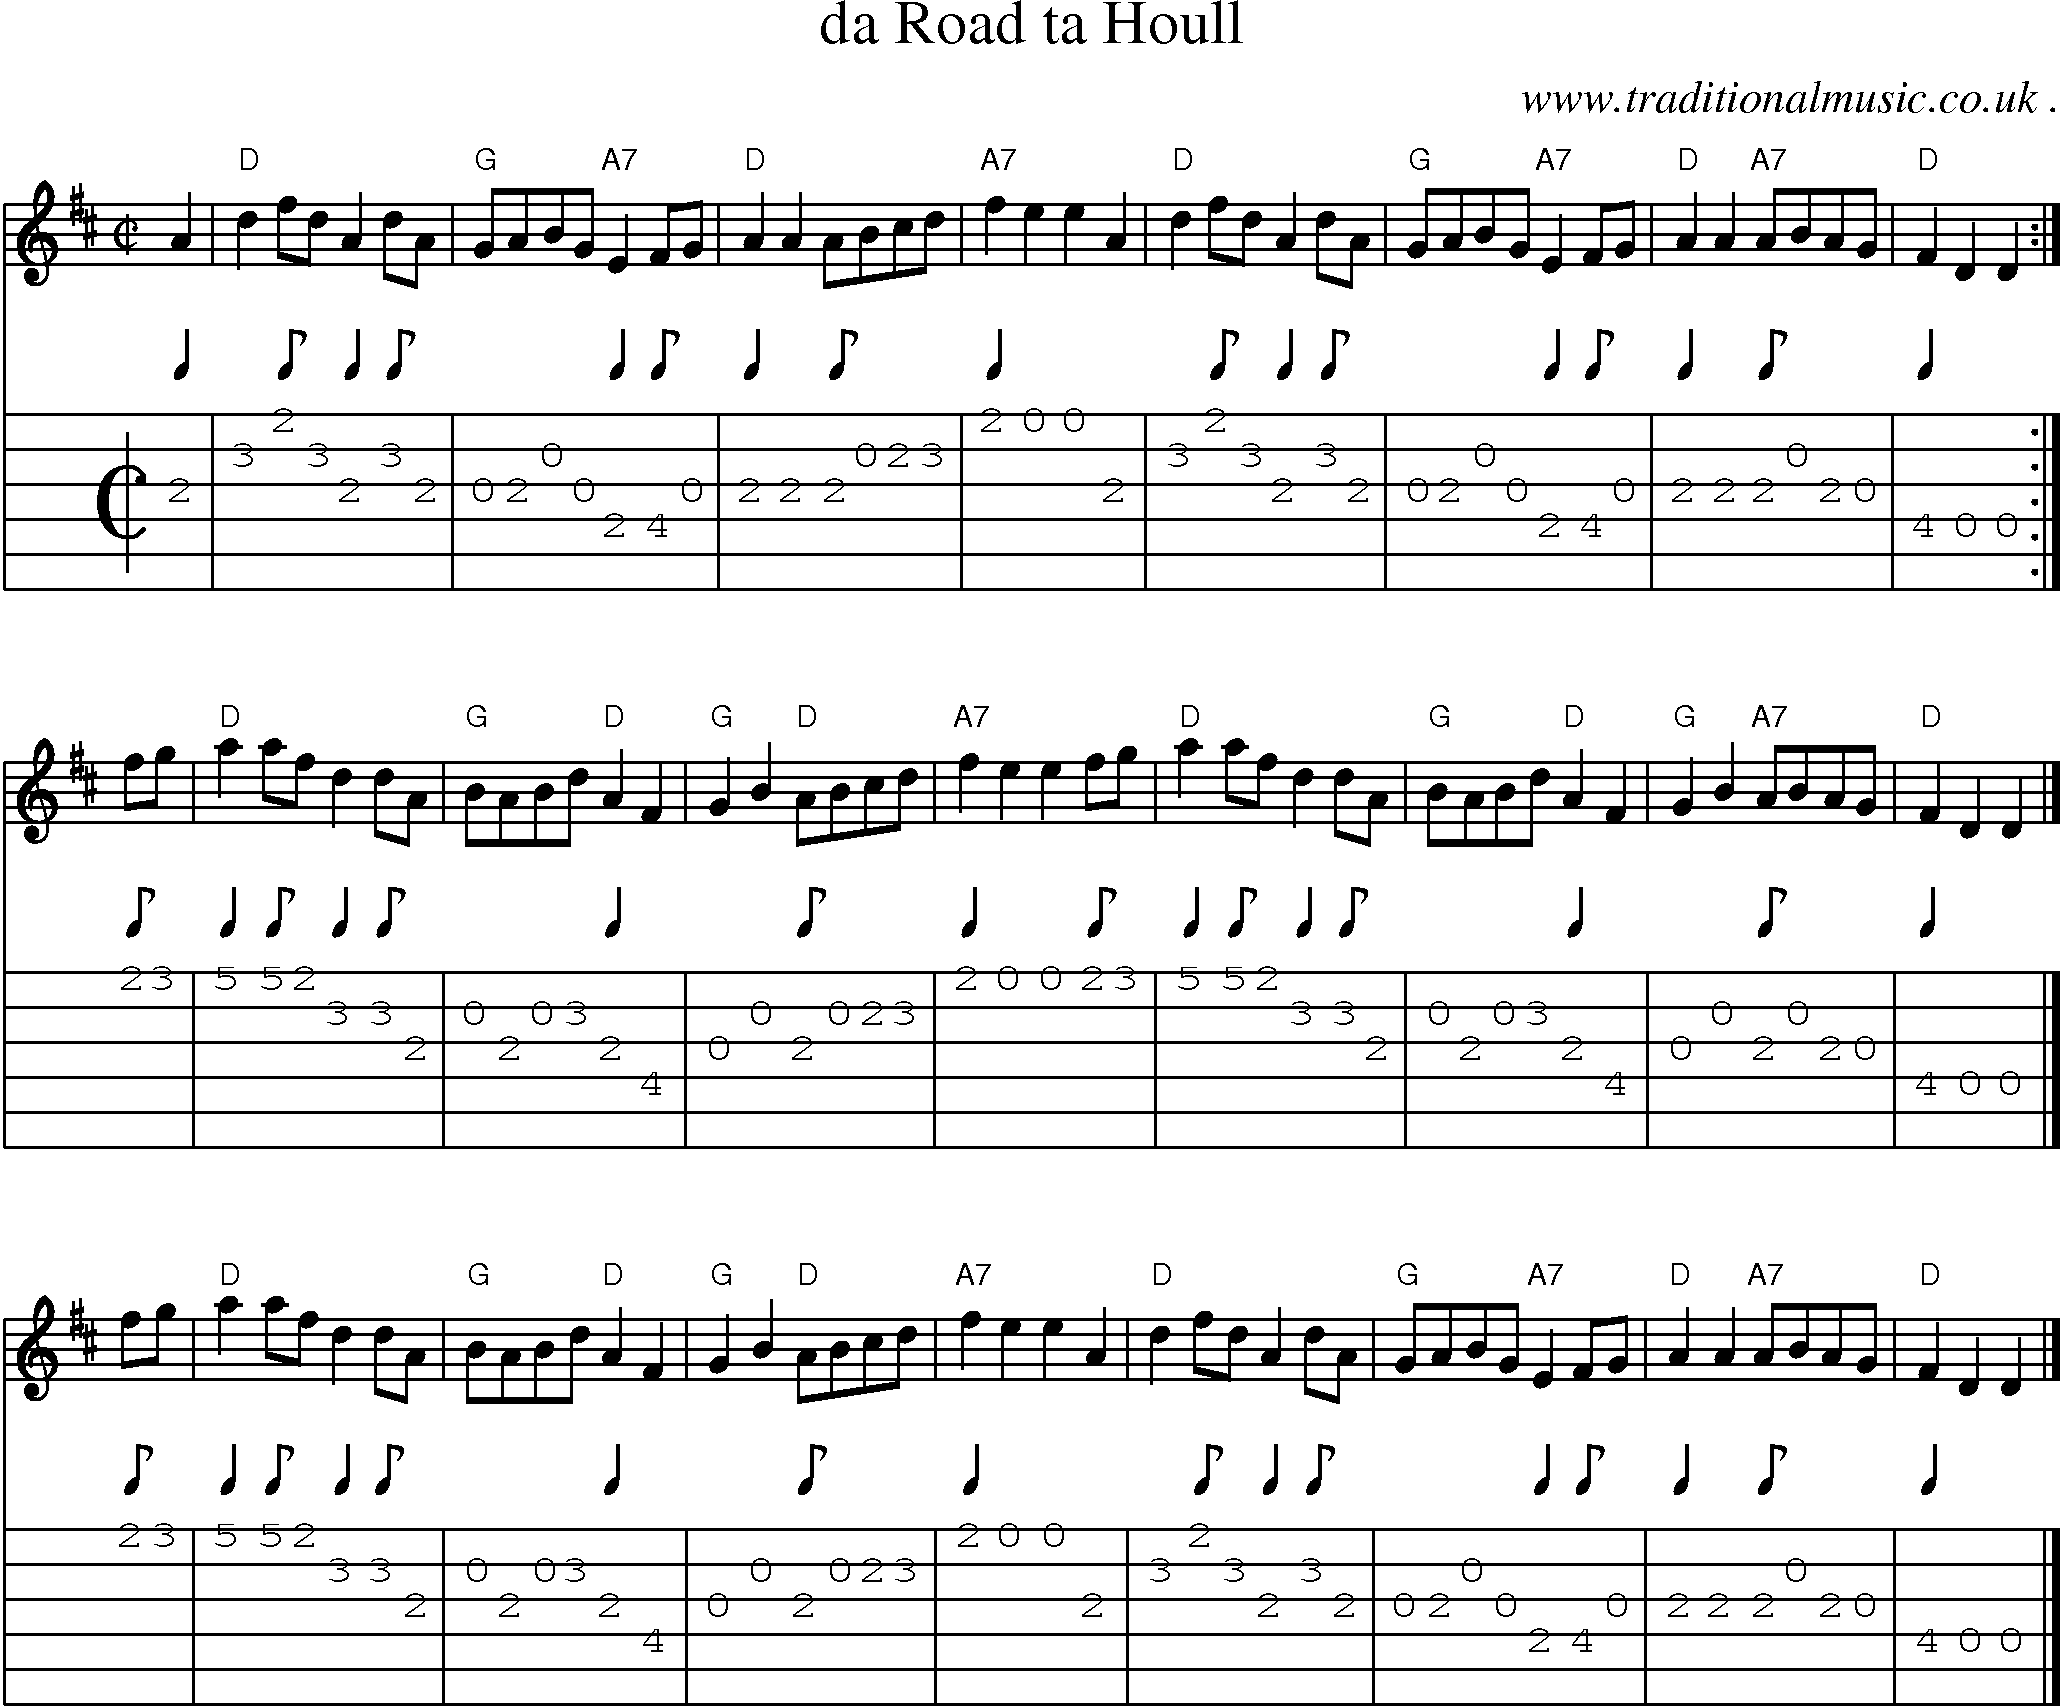 Sheet-music  score, Chords and Guitar Tabs for Da Road Ta Houll